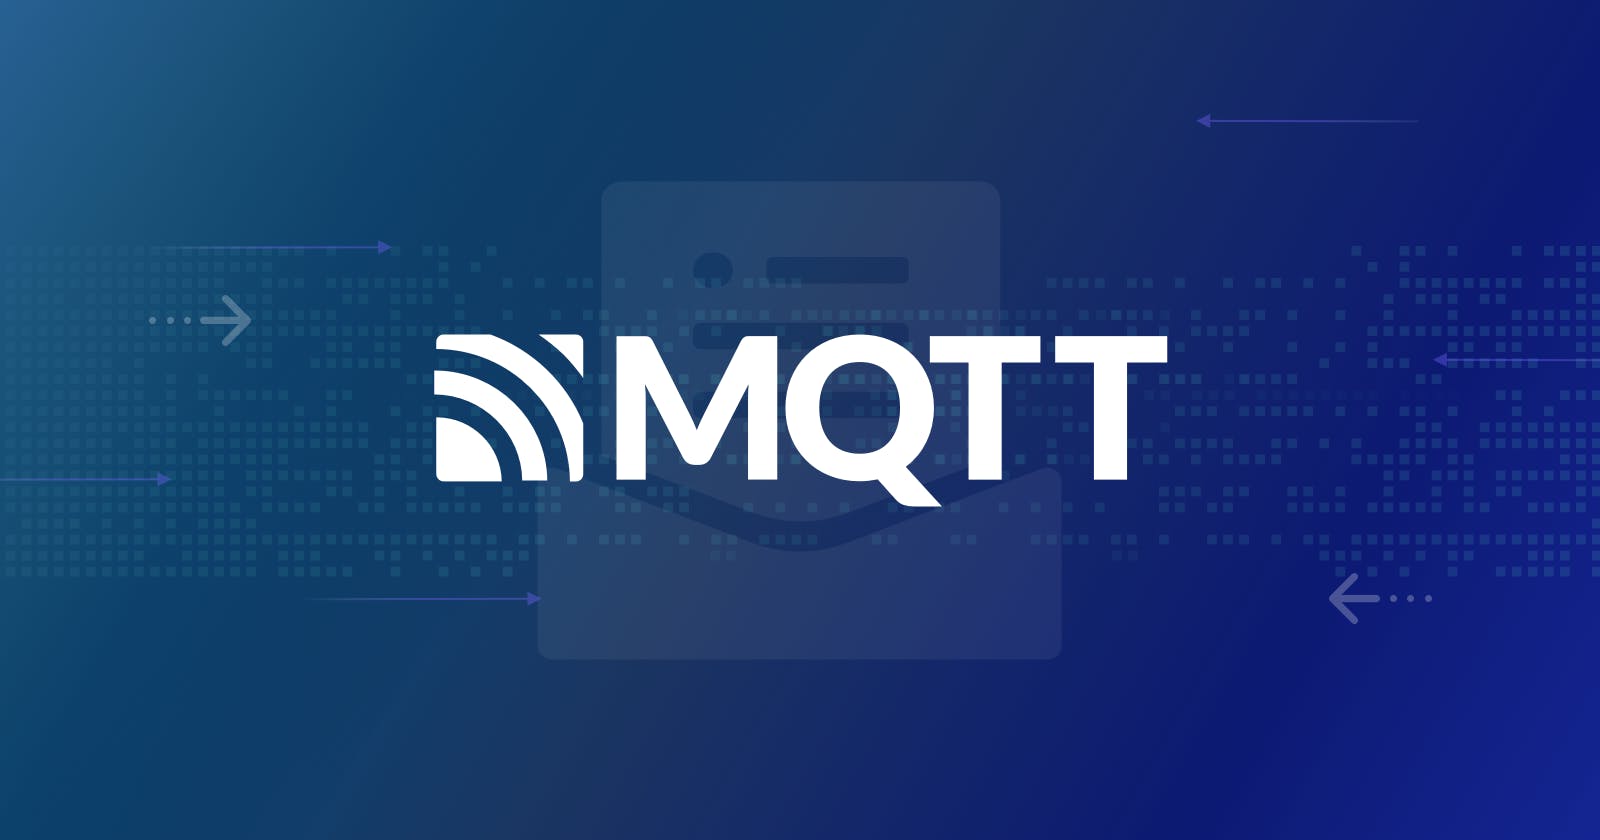 What is The MQTT and Why is it the Best Protocol for IoT?